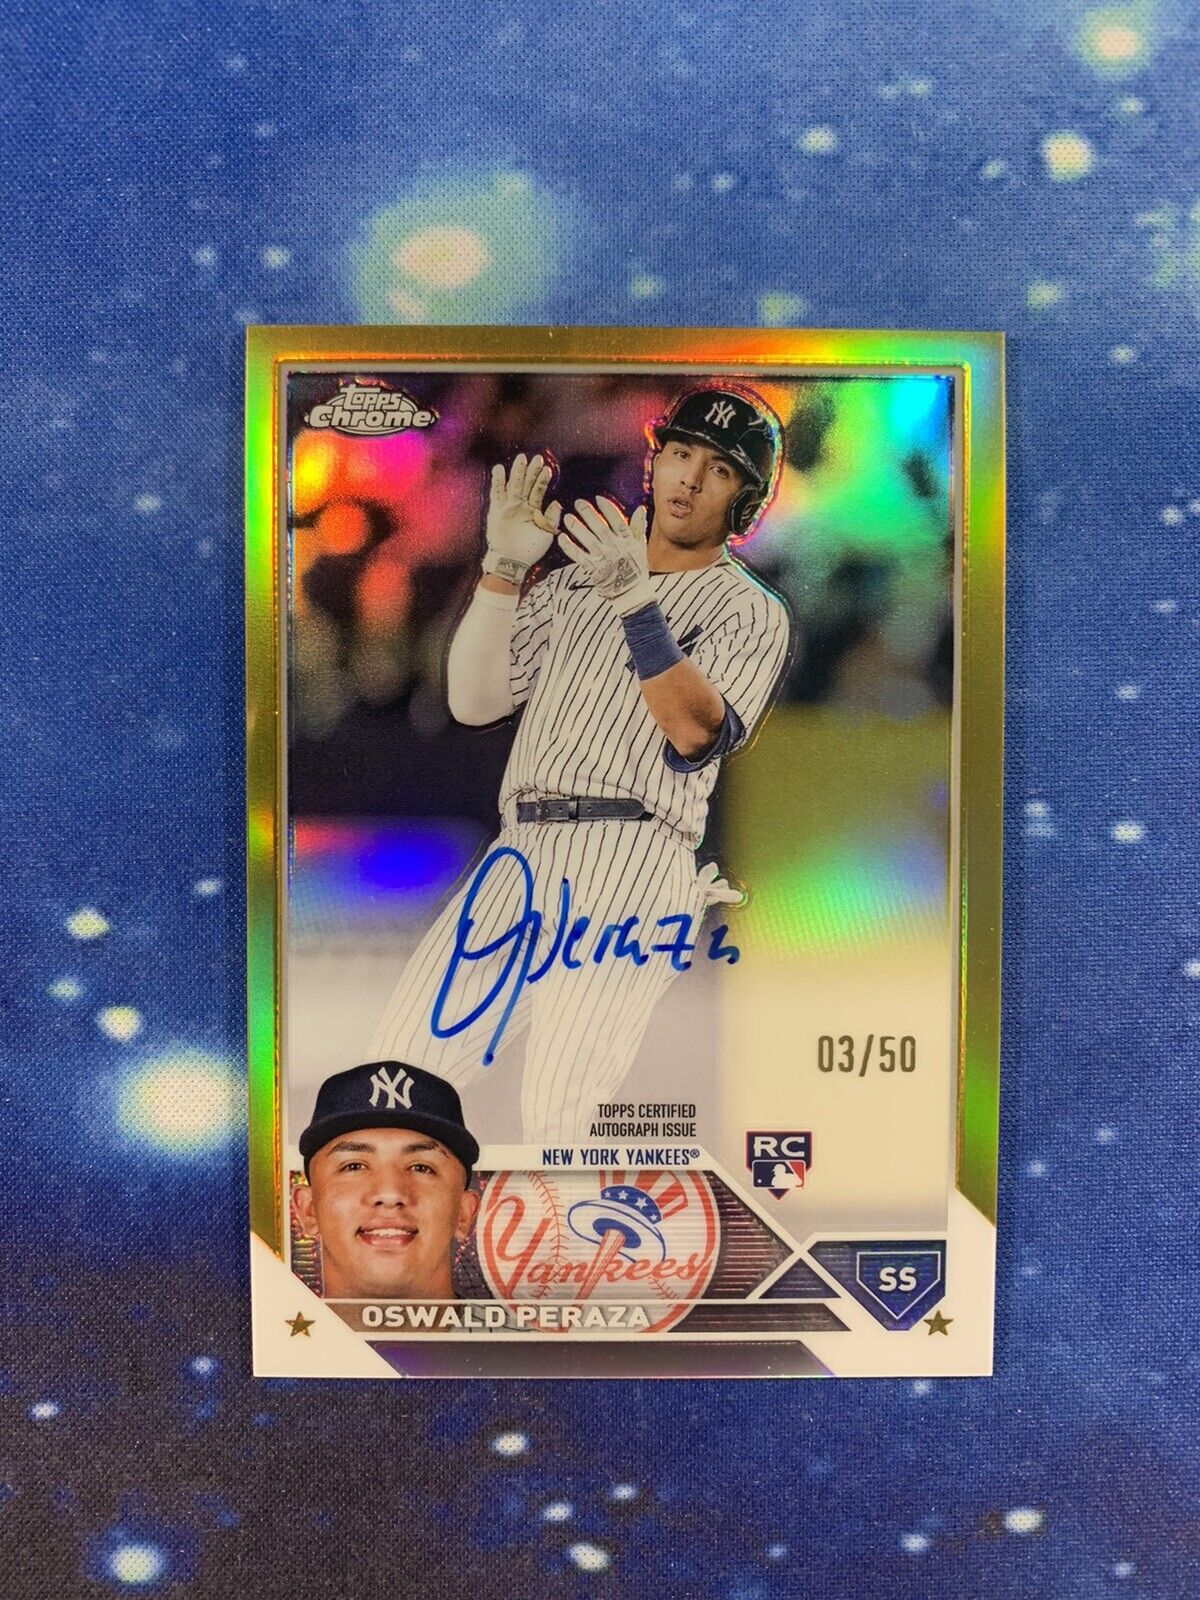 2023 Topps Chrome Oswald Peraza Gold Refractor Auto /50 Rookie RC YANKEES